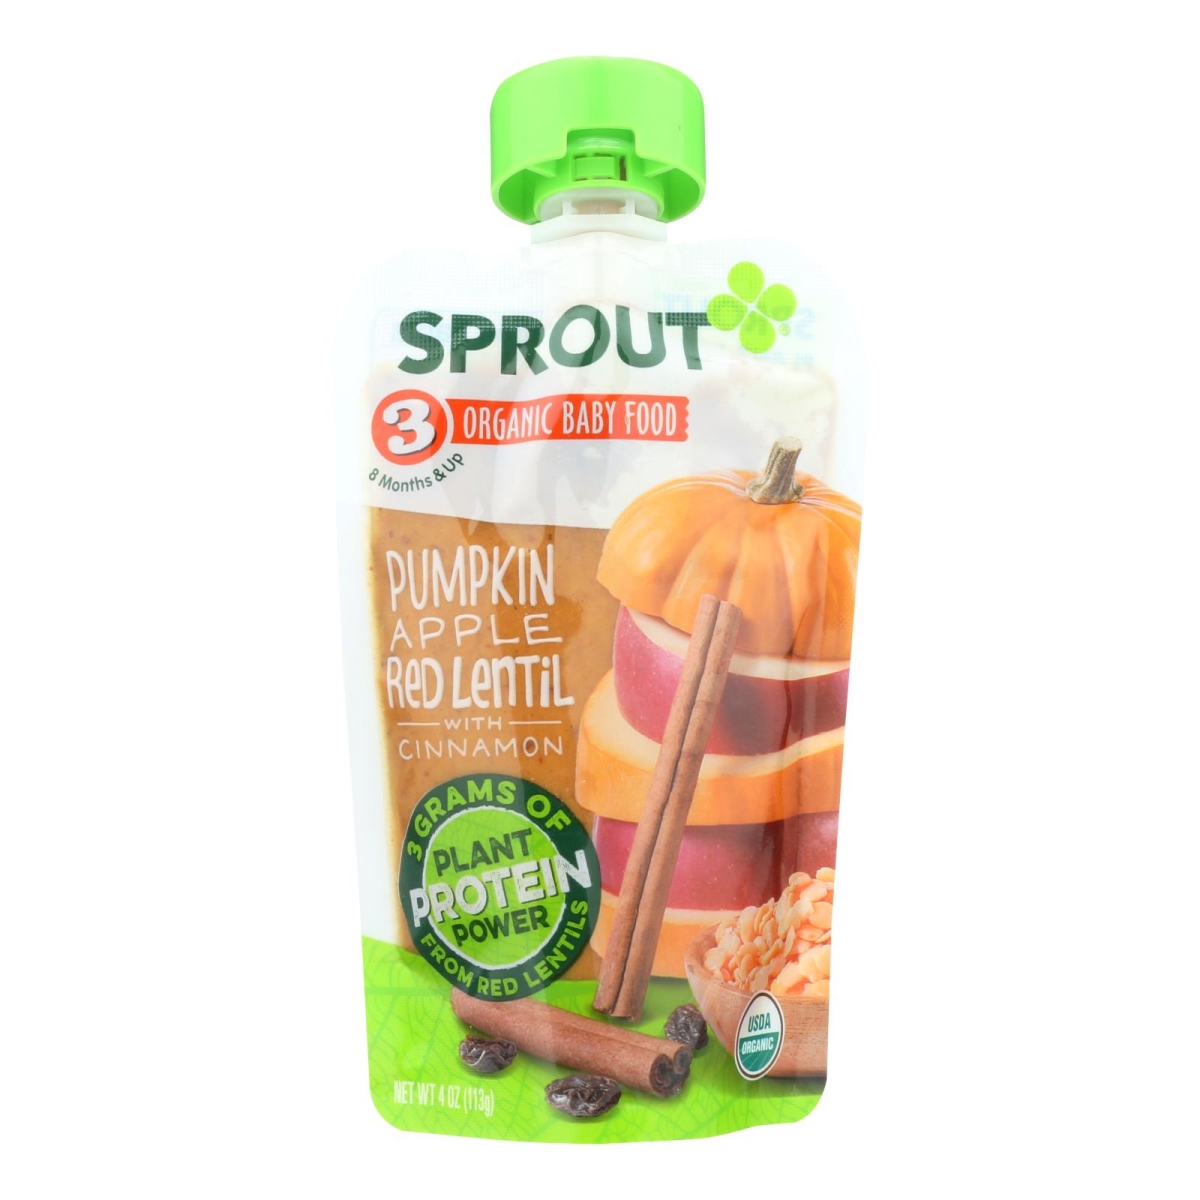 Picture of Sprout Foods HG2092211 4 oz Pmpkin Apple Cinnamon Baby Food - Case of 6